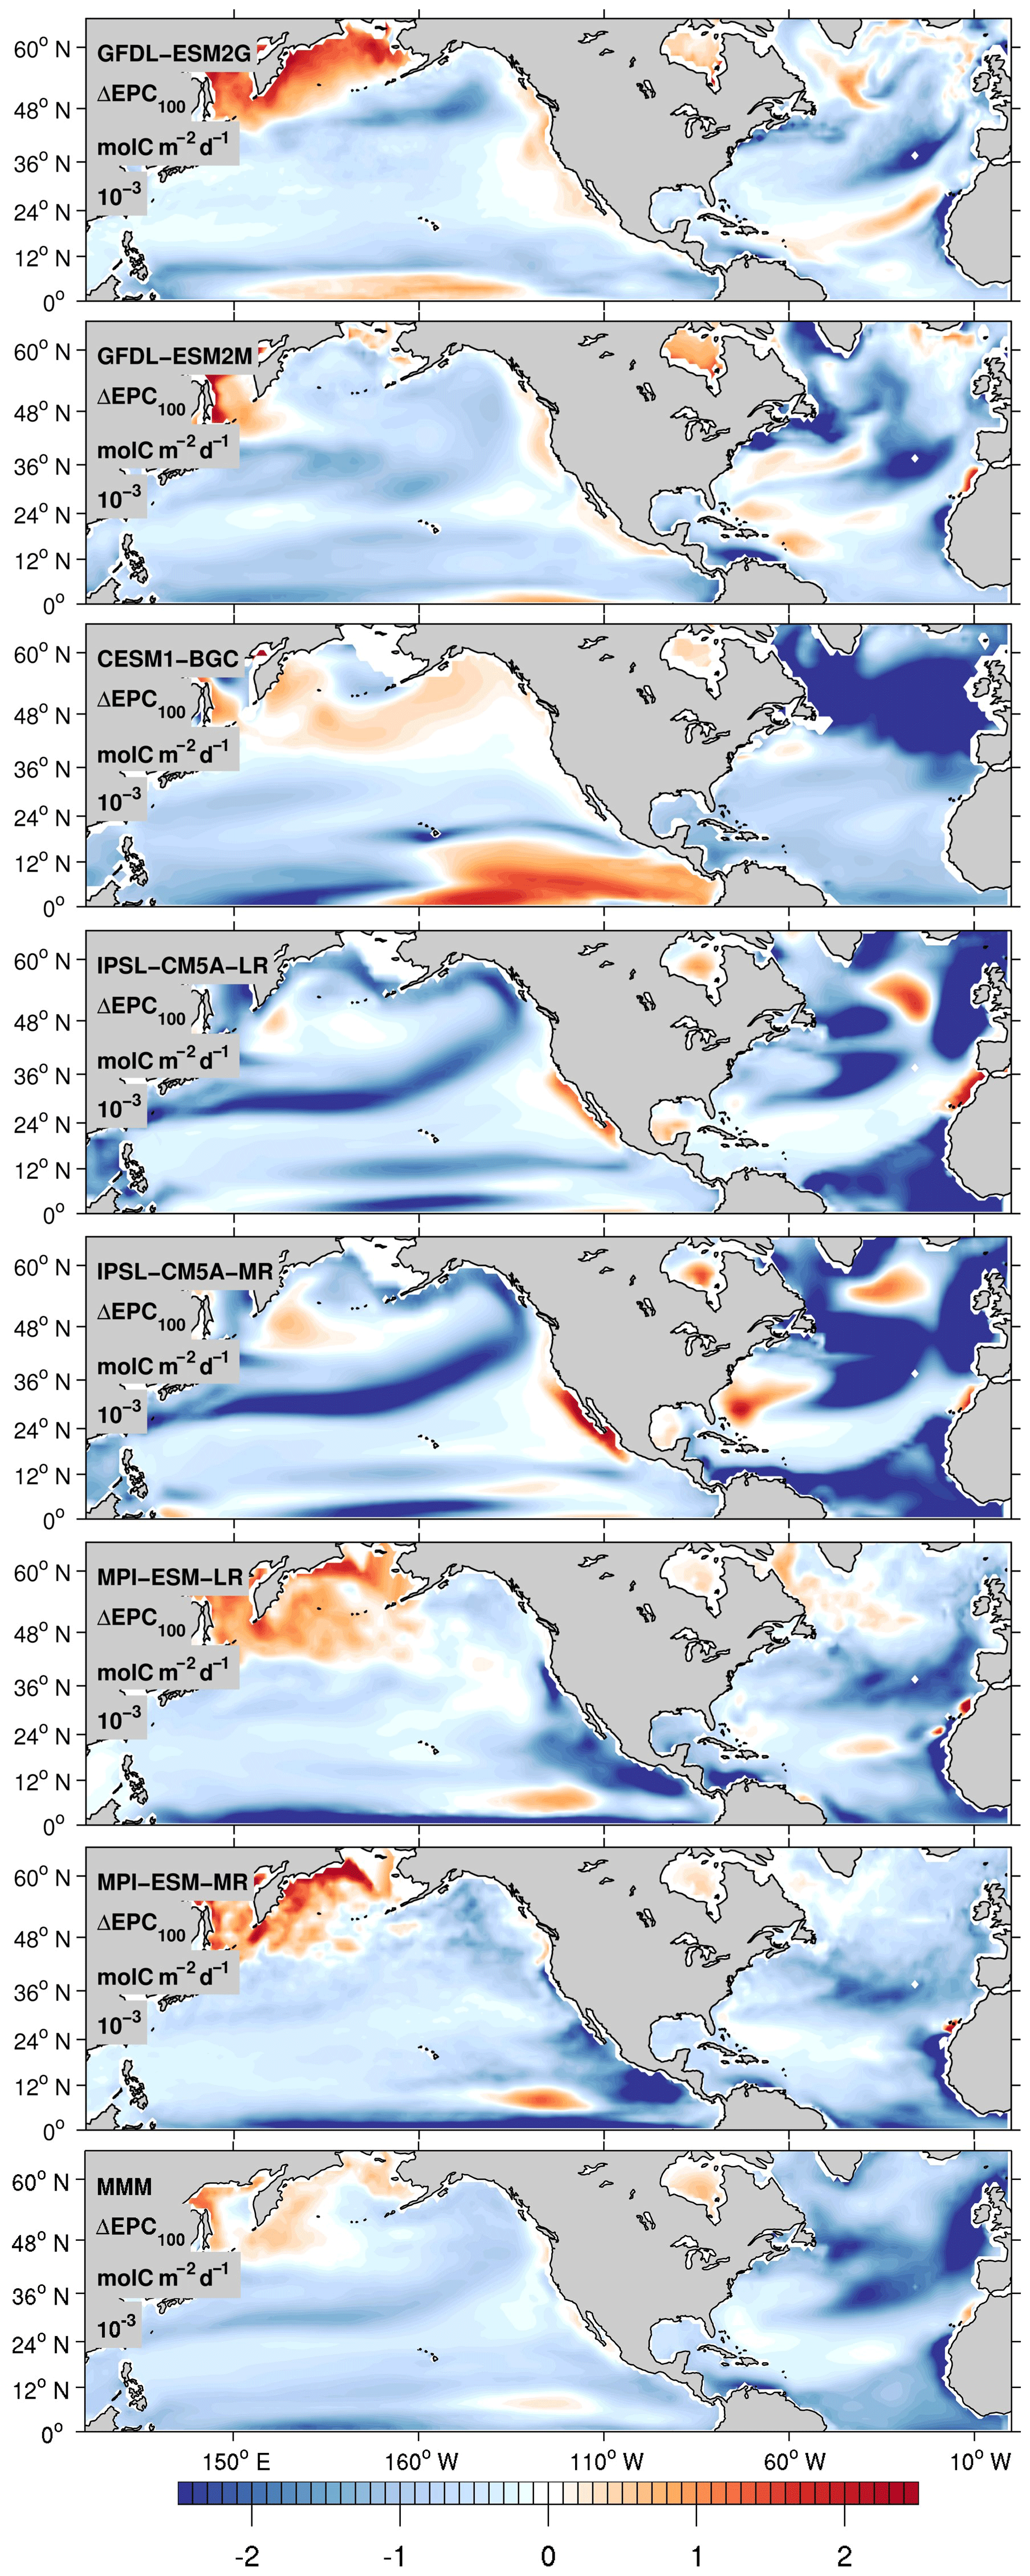 BG - Modulation of the North Atlantic deoxygenation by the 